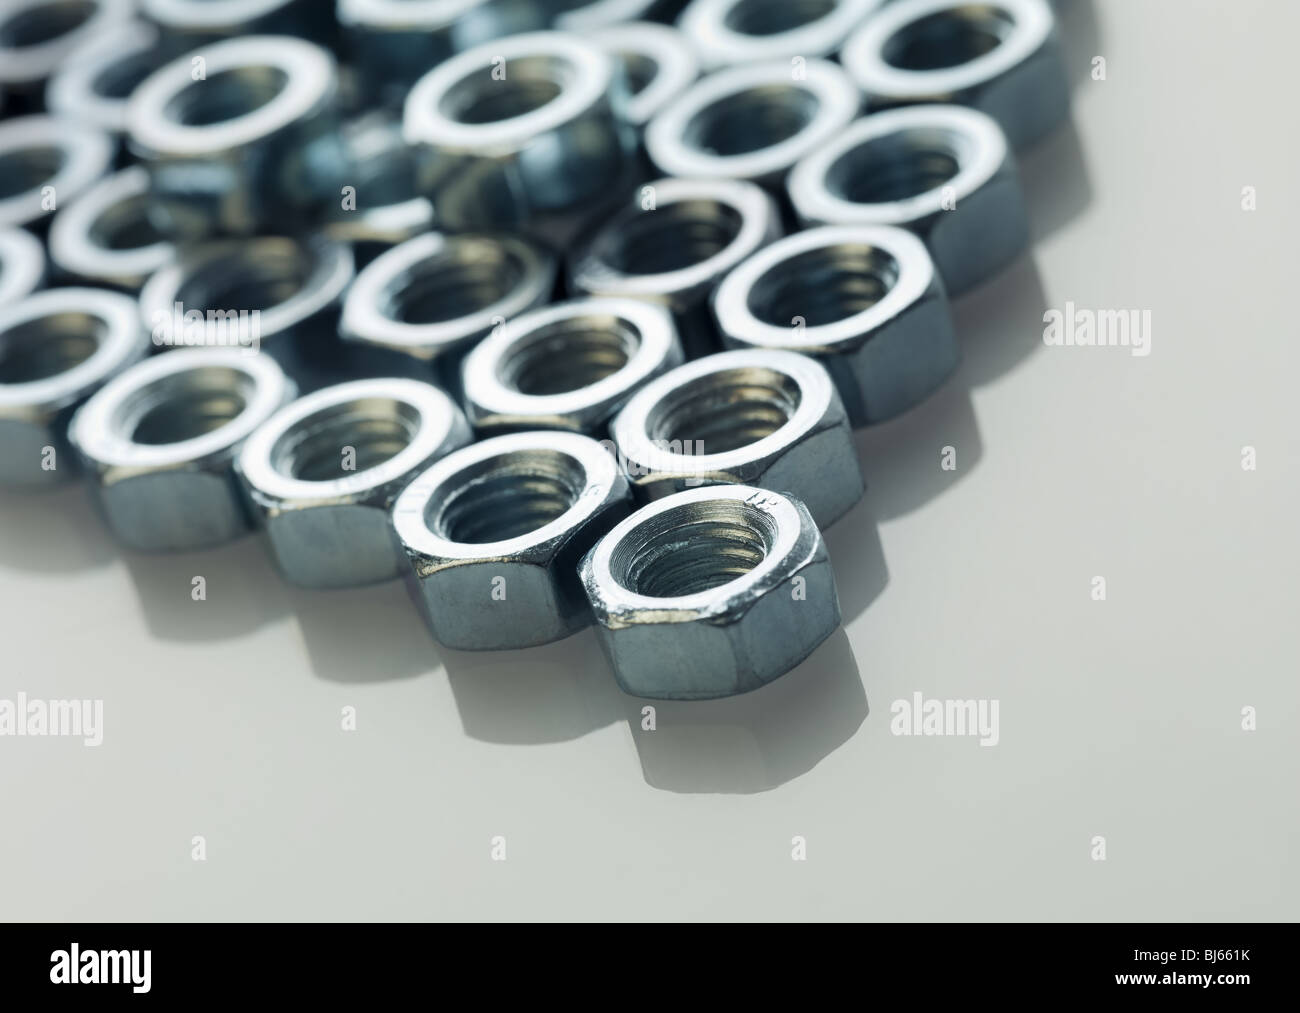 screw bolts on reflective white surface. Stock Photo